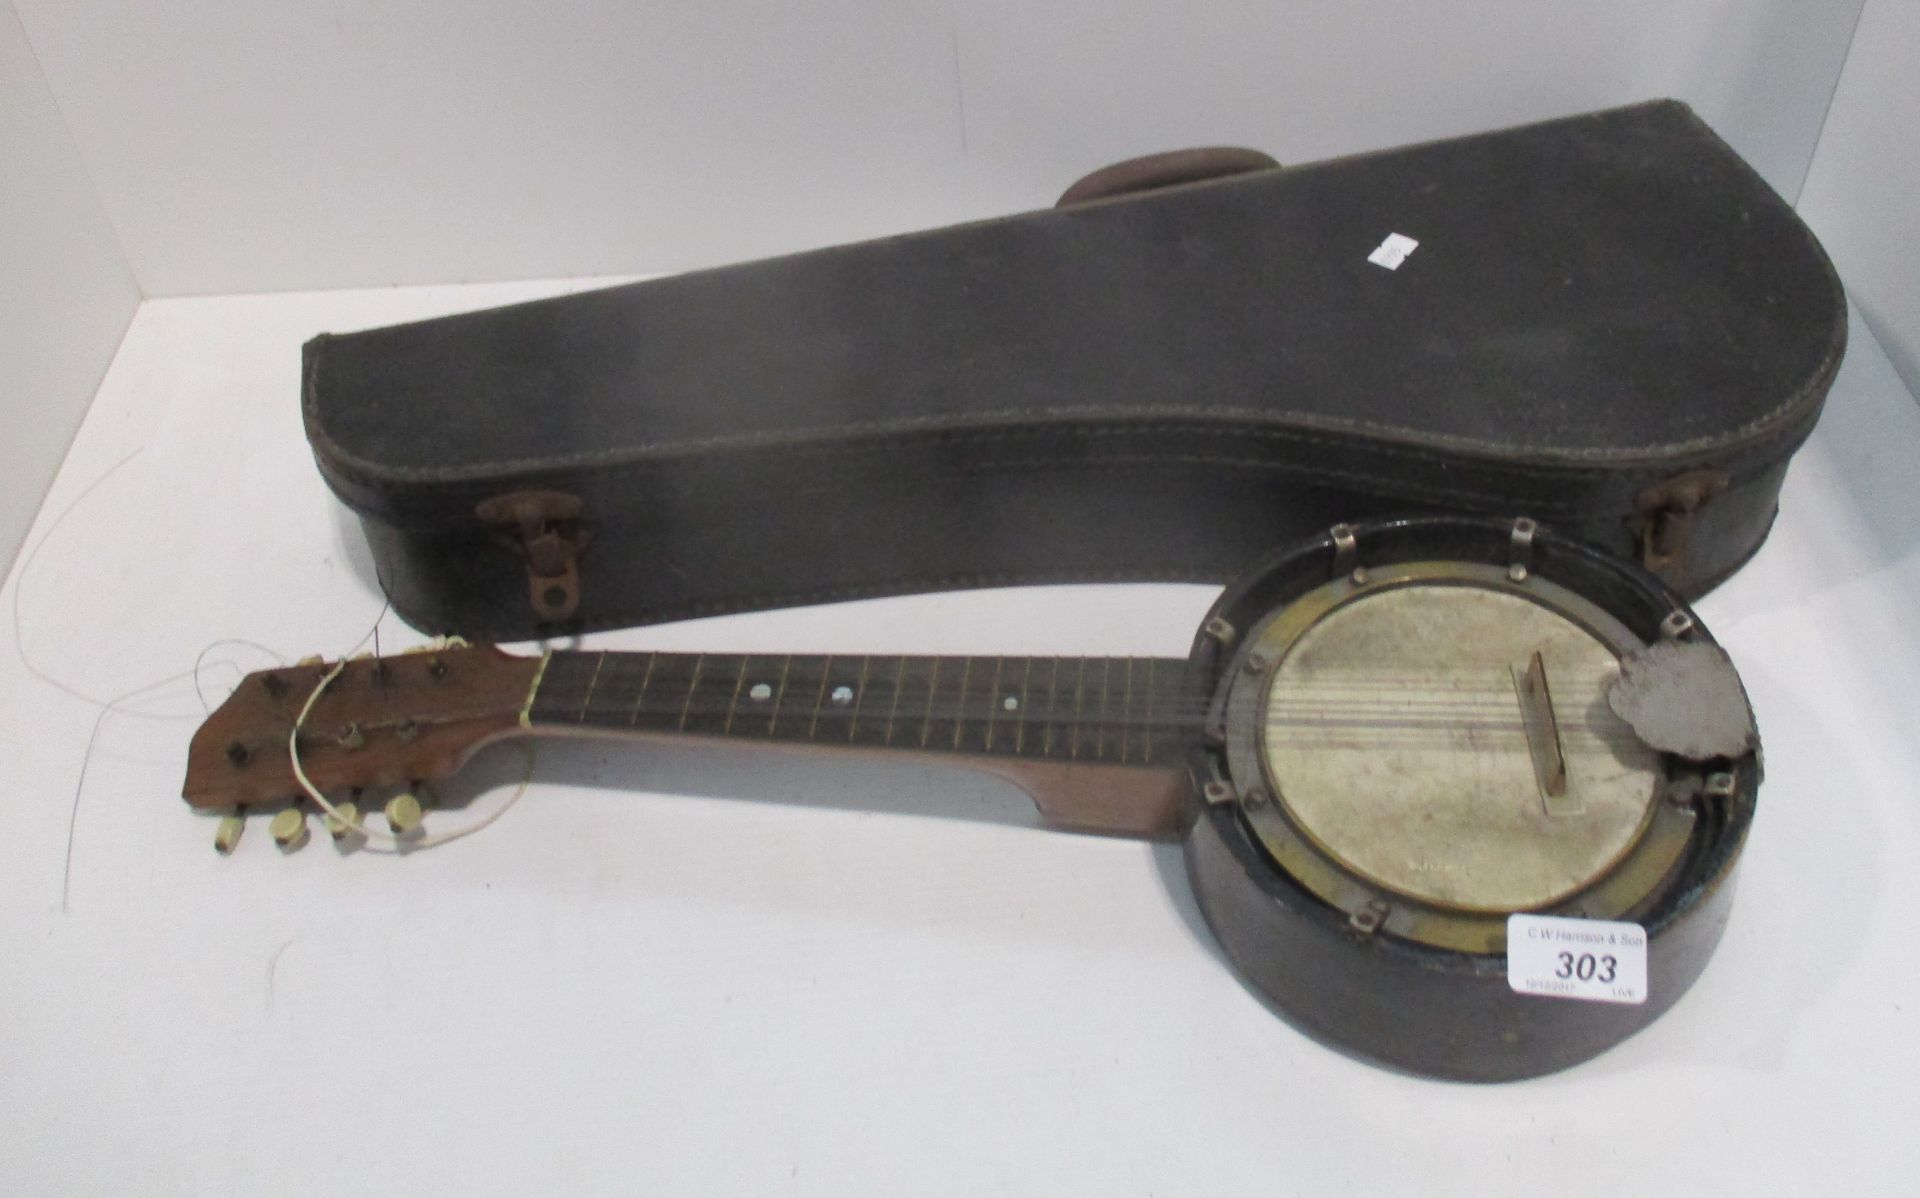 An 8 string banjo in carrying case